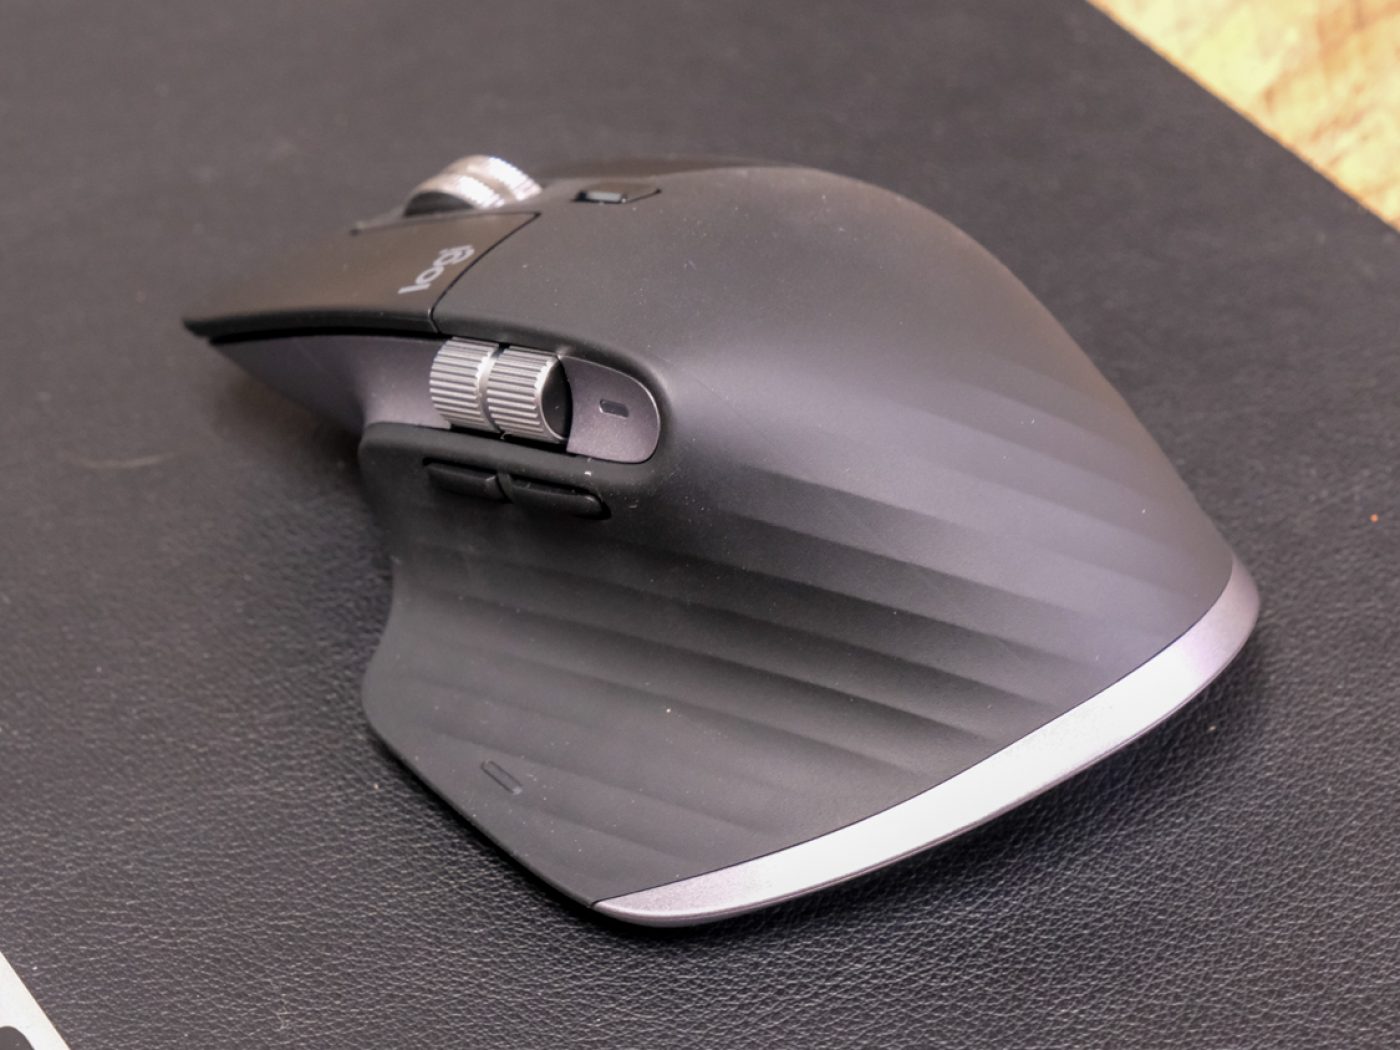 Review: Can Logitech's MX Master 3S Convince Me to Use a Mouse on